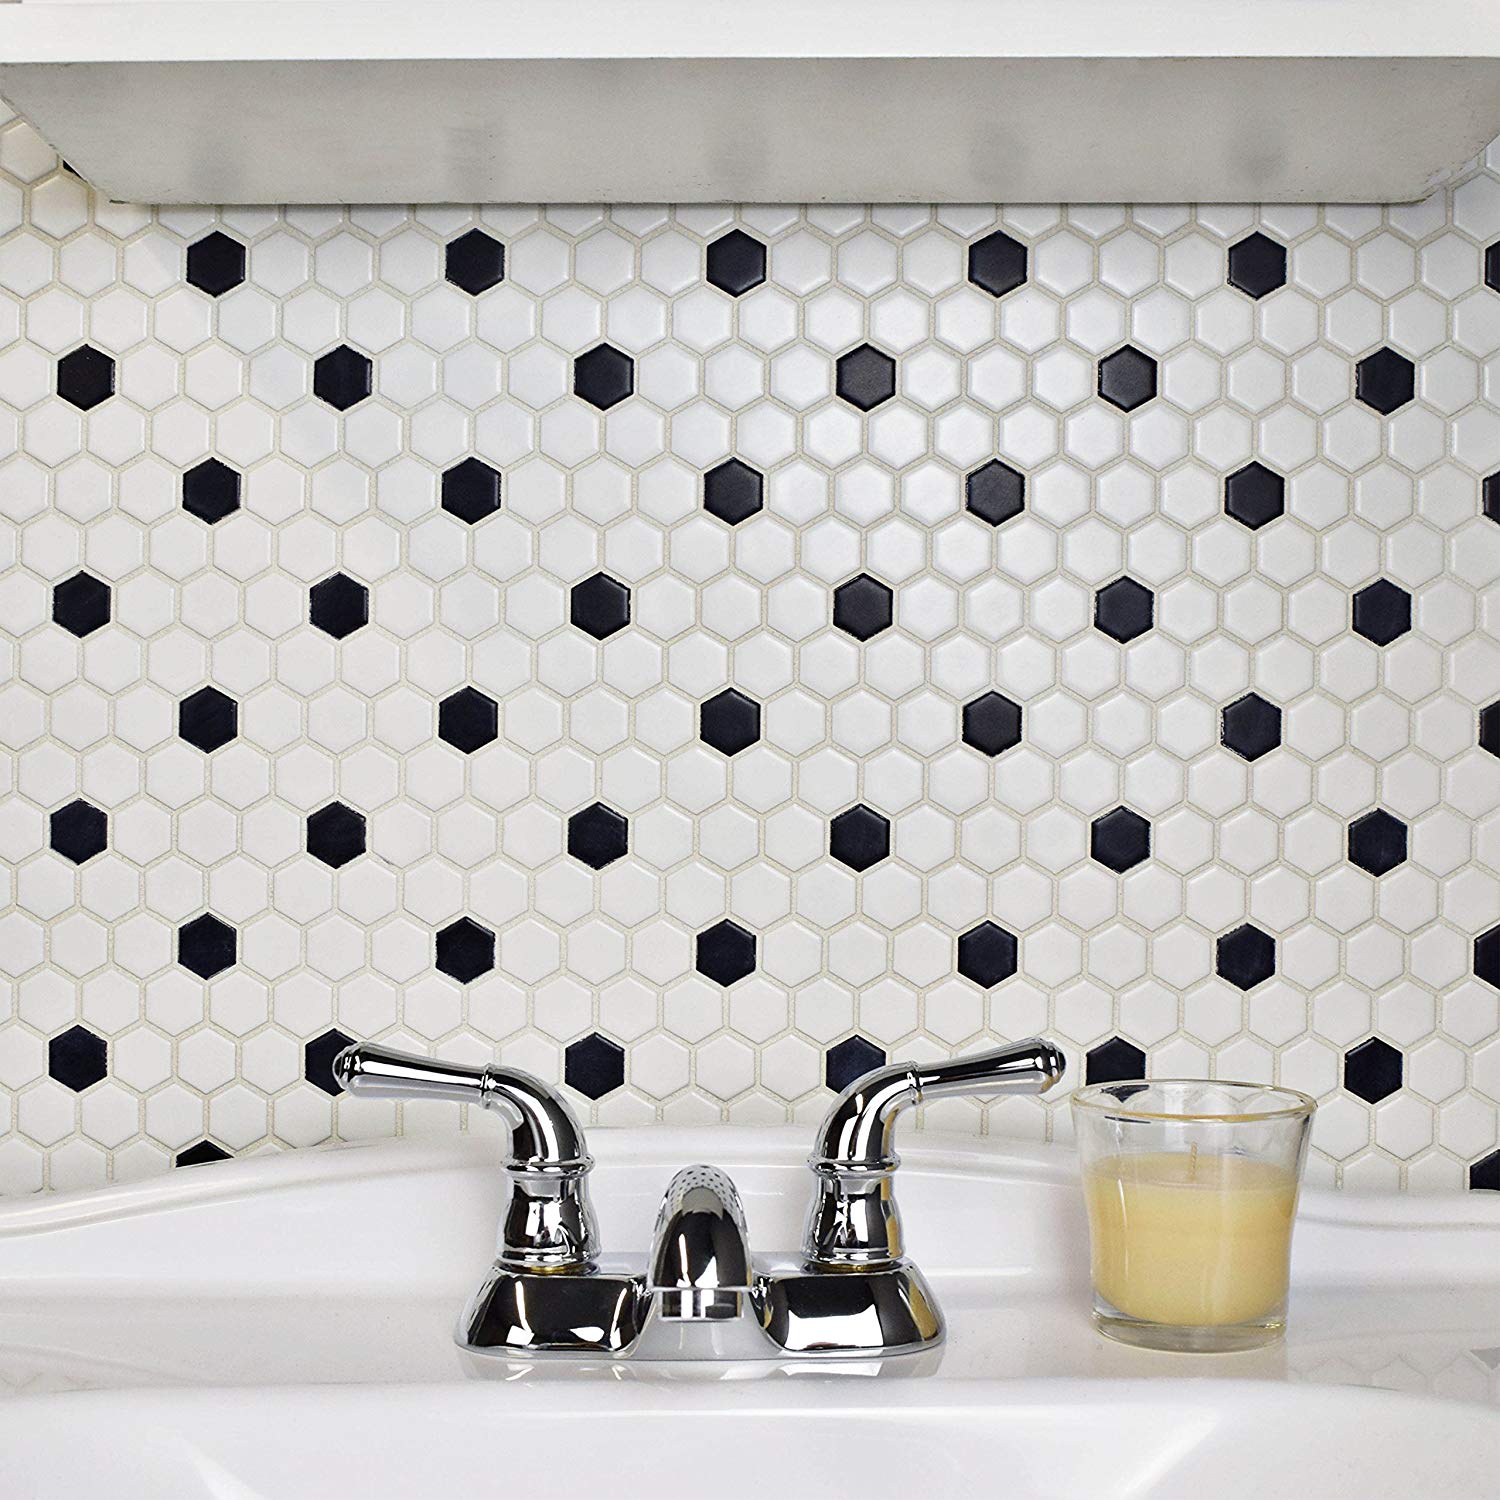 Retro Hex Porcelain Floor and Wall Tile, 10.25" x 11.75", Matte White with Black Dot